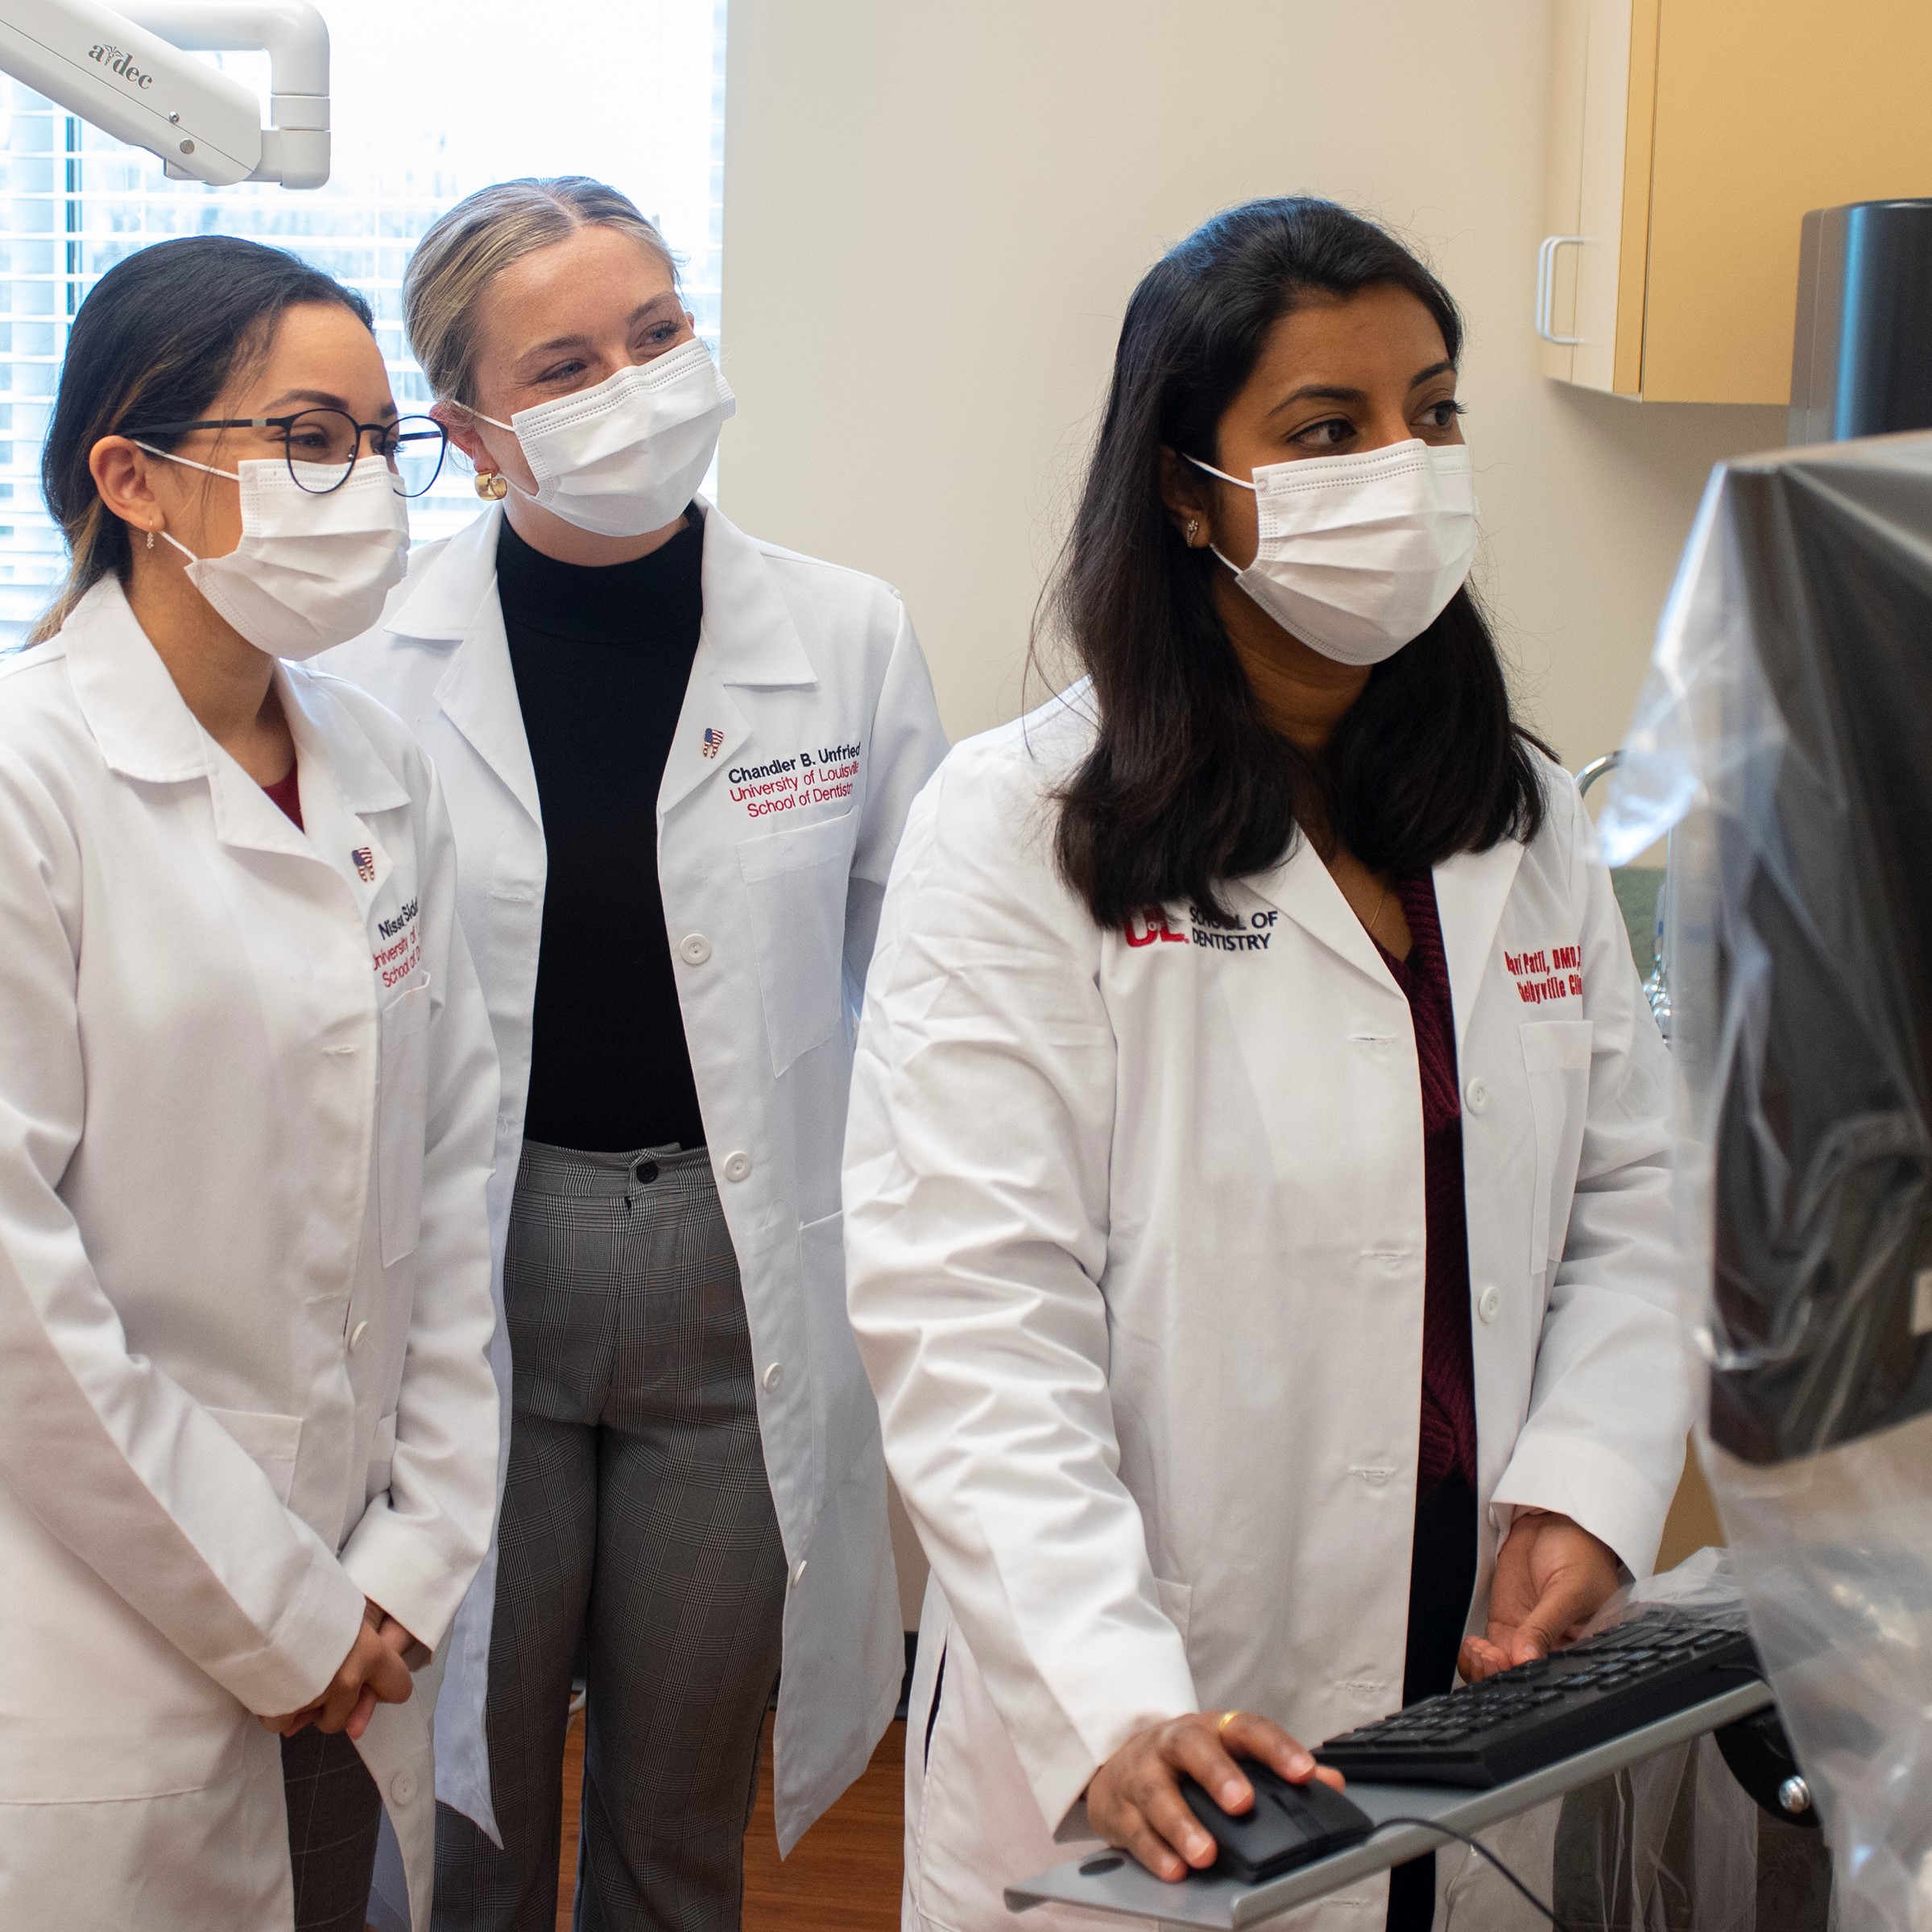 UofL expands its reach to Shelbyville, providing dental care for the underserved